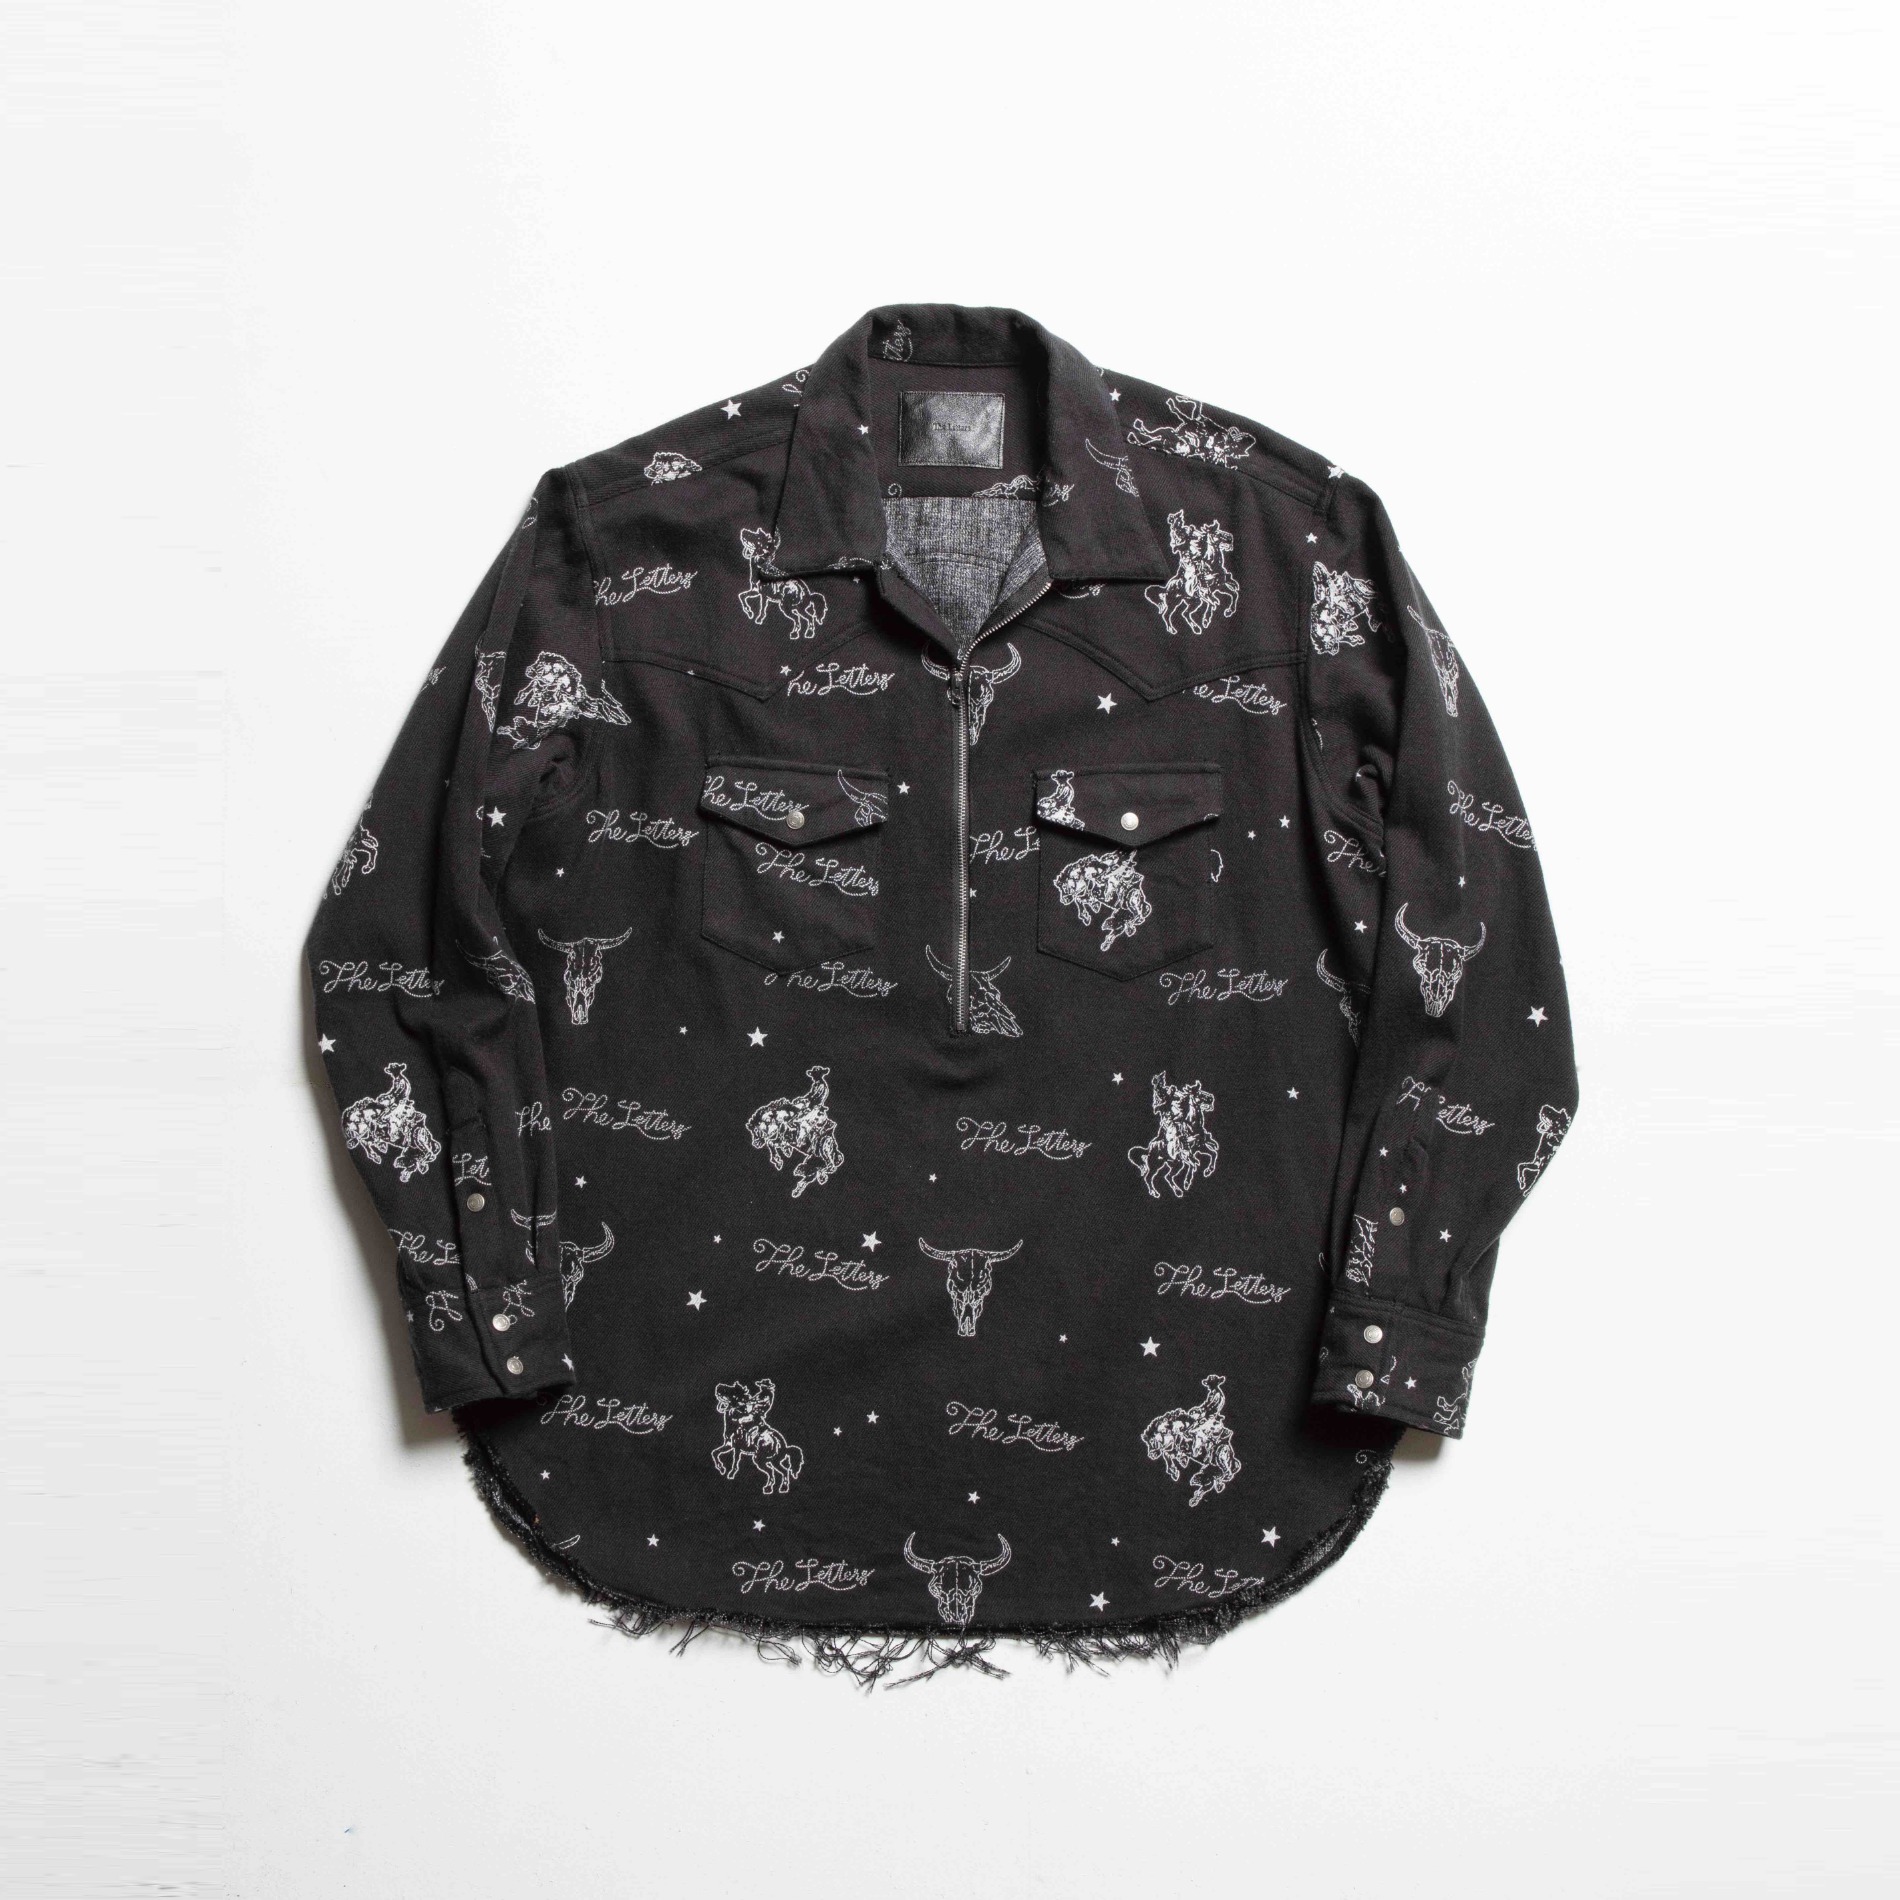 THE LETTERS WESTERN PULL OVER SHIRT COW BOY SKULL FLANNEL BLACK